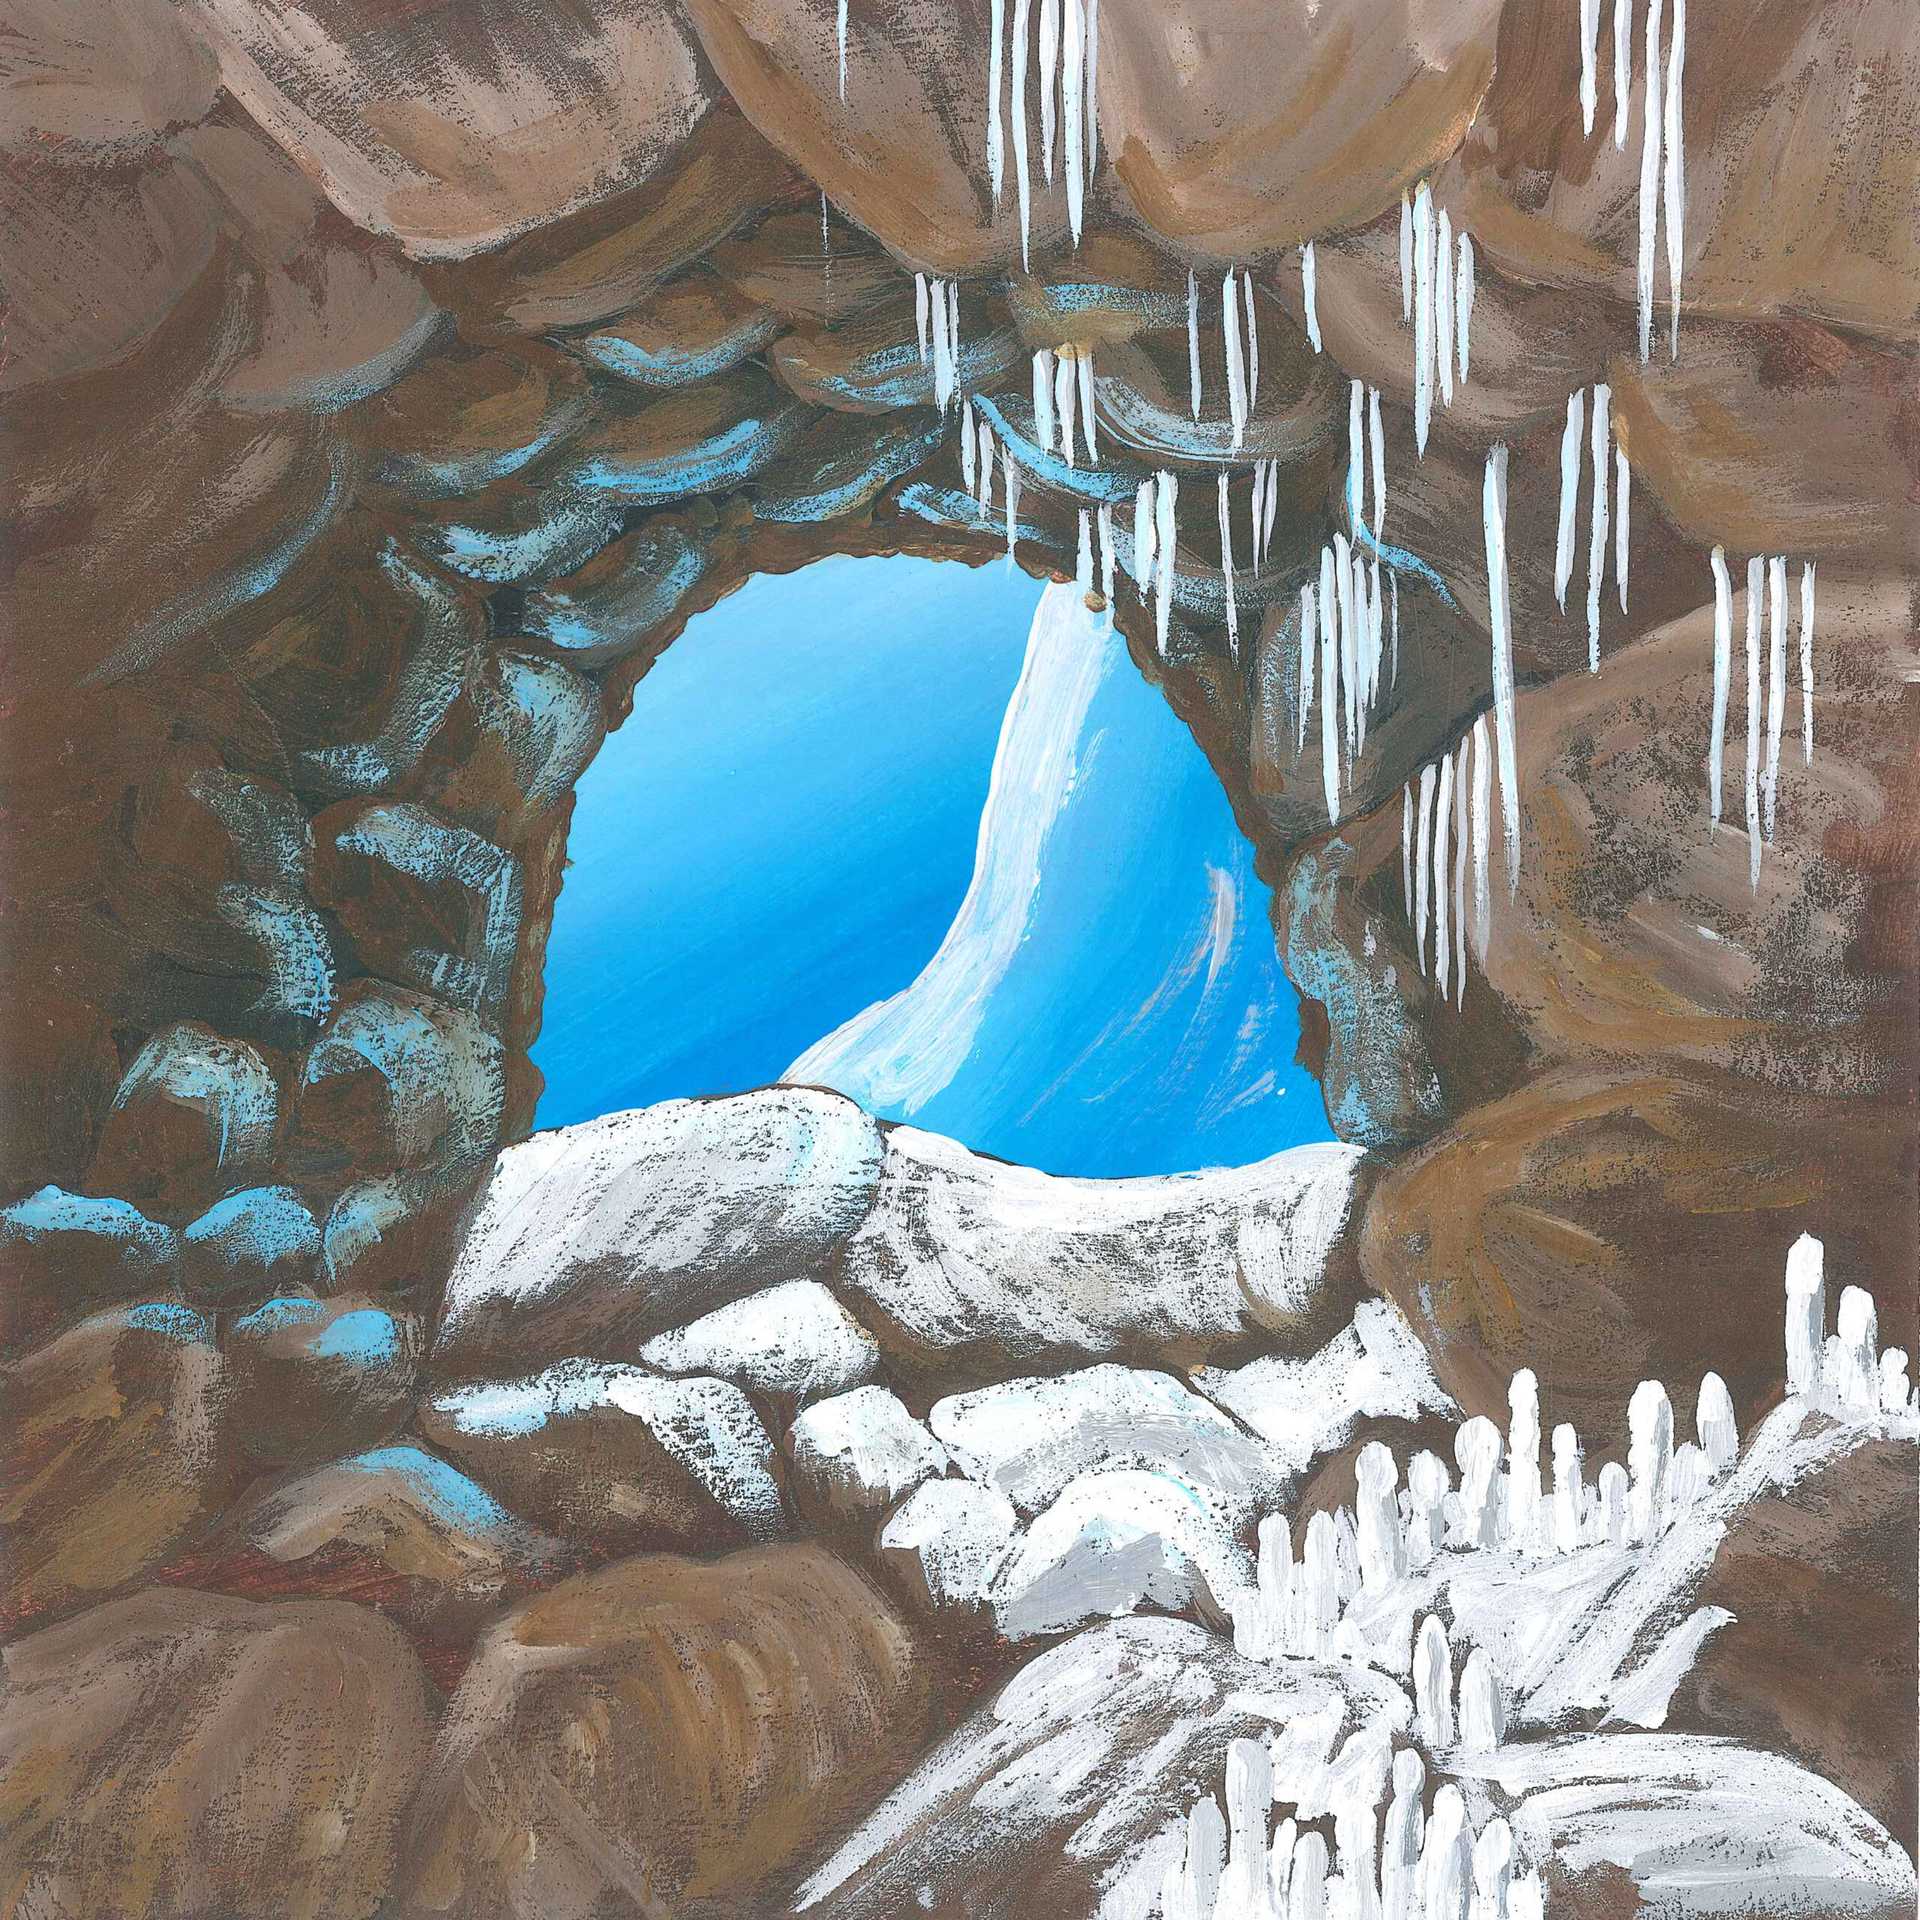 Dripping Cave - earth.fm